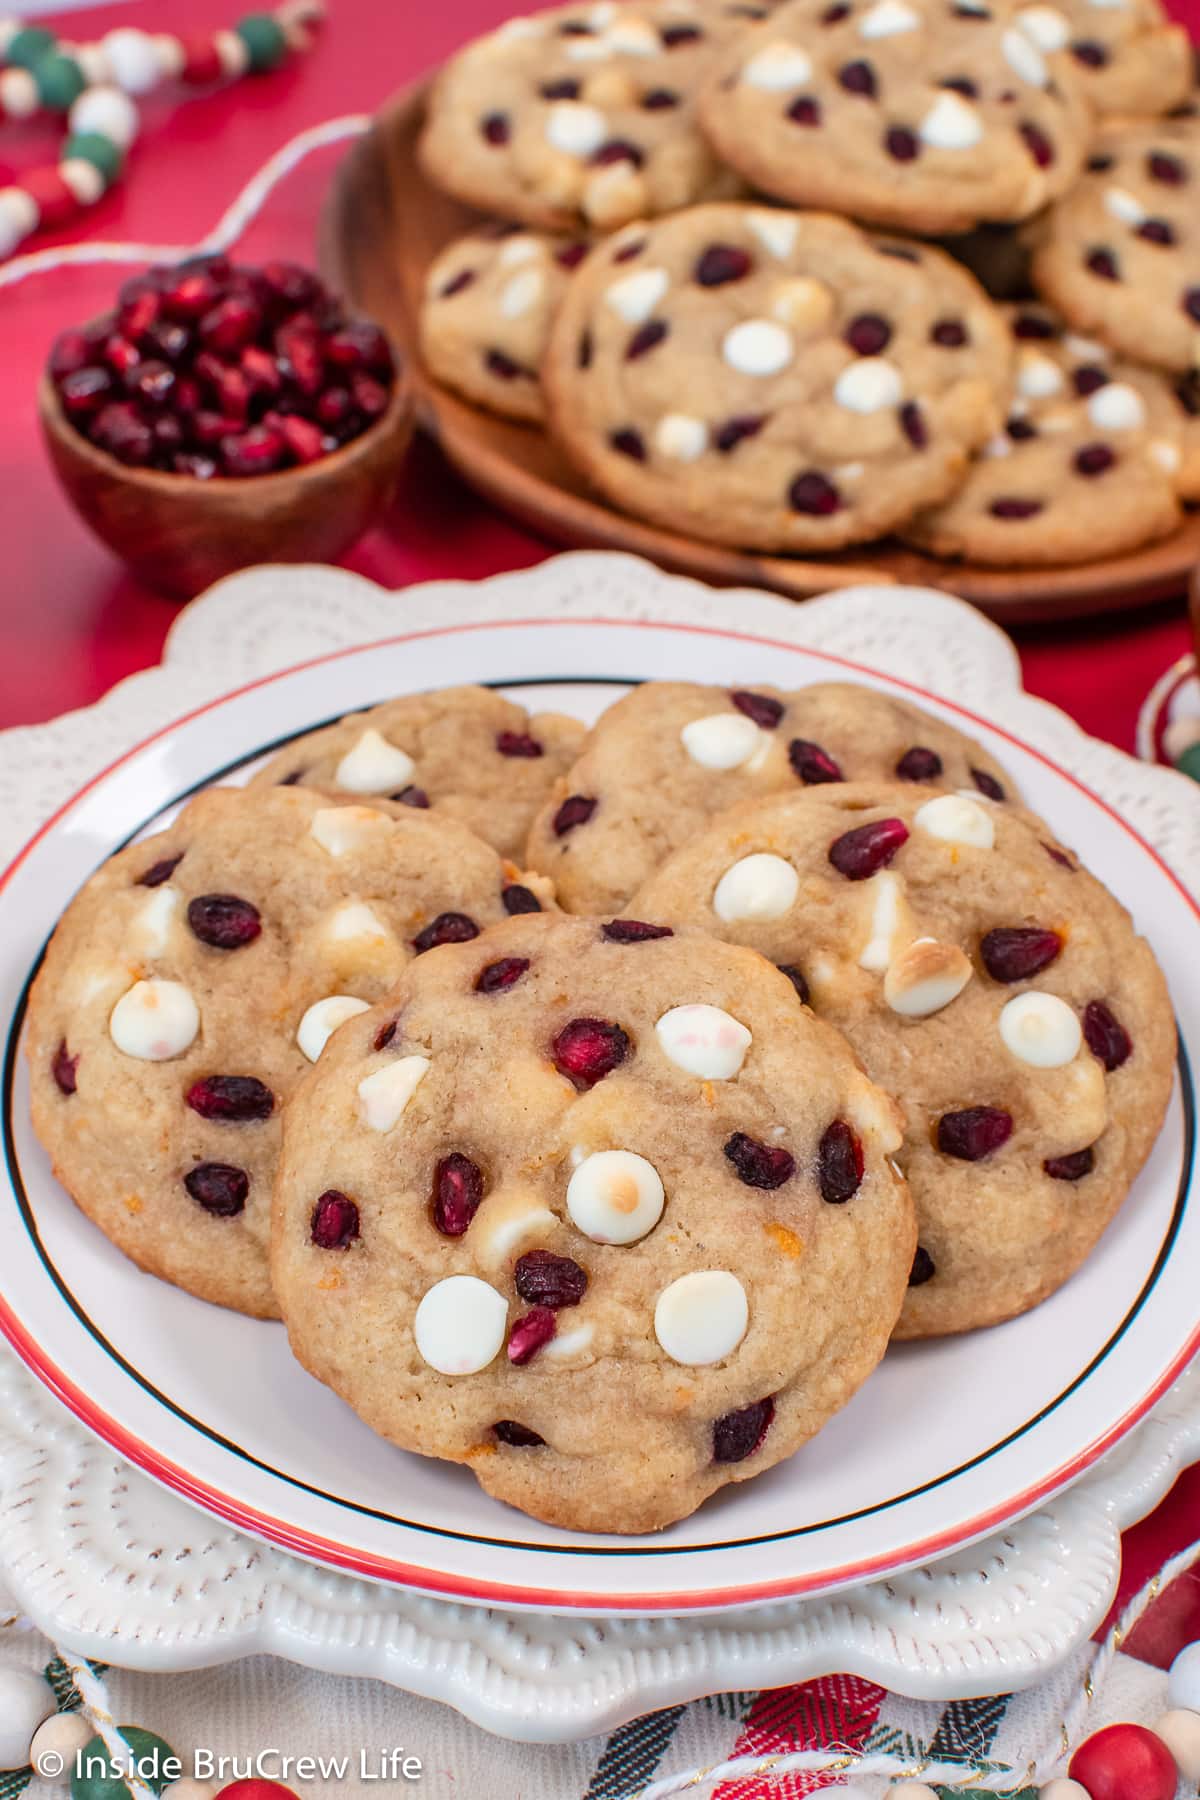 A white plate with white chocolate chip cookies on it.